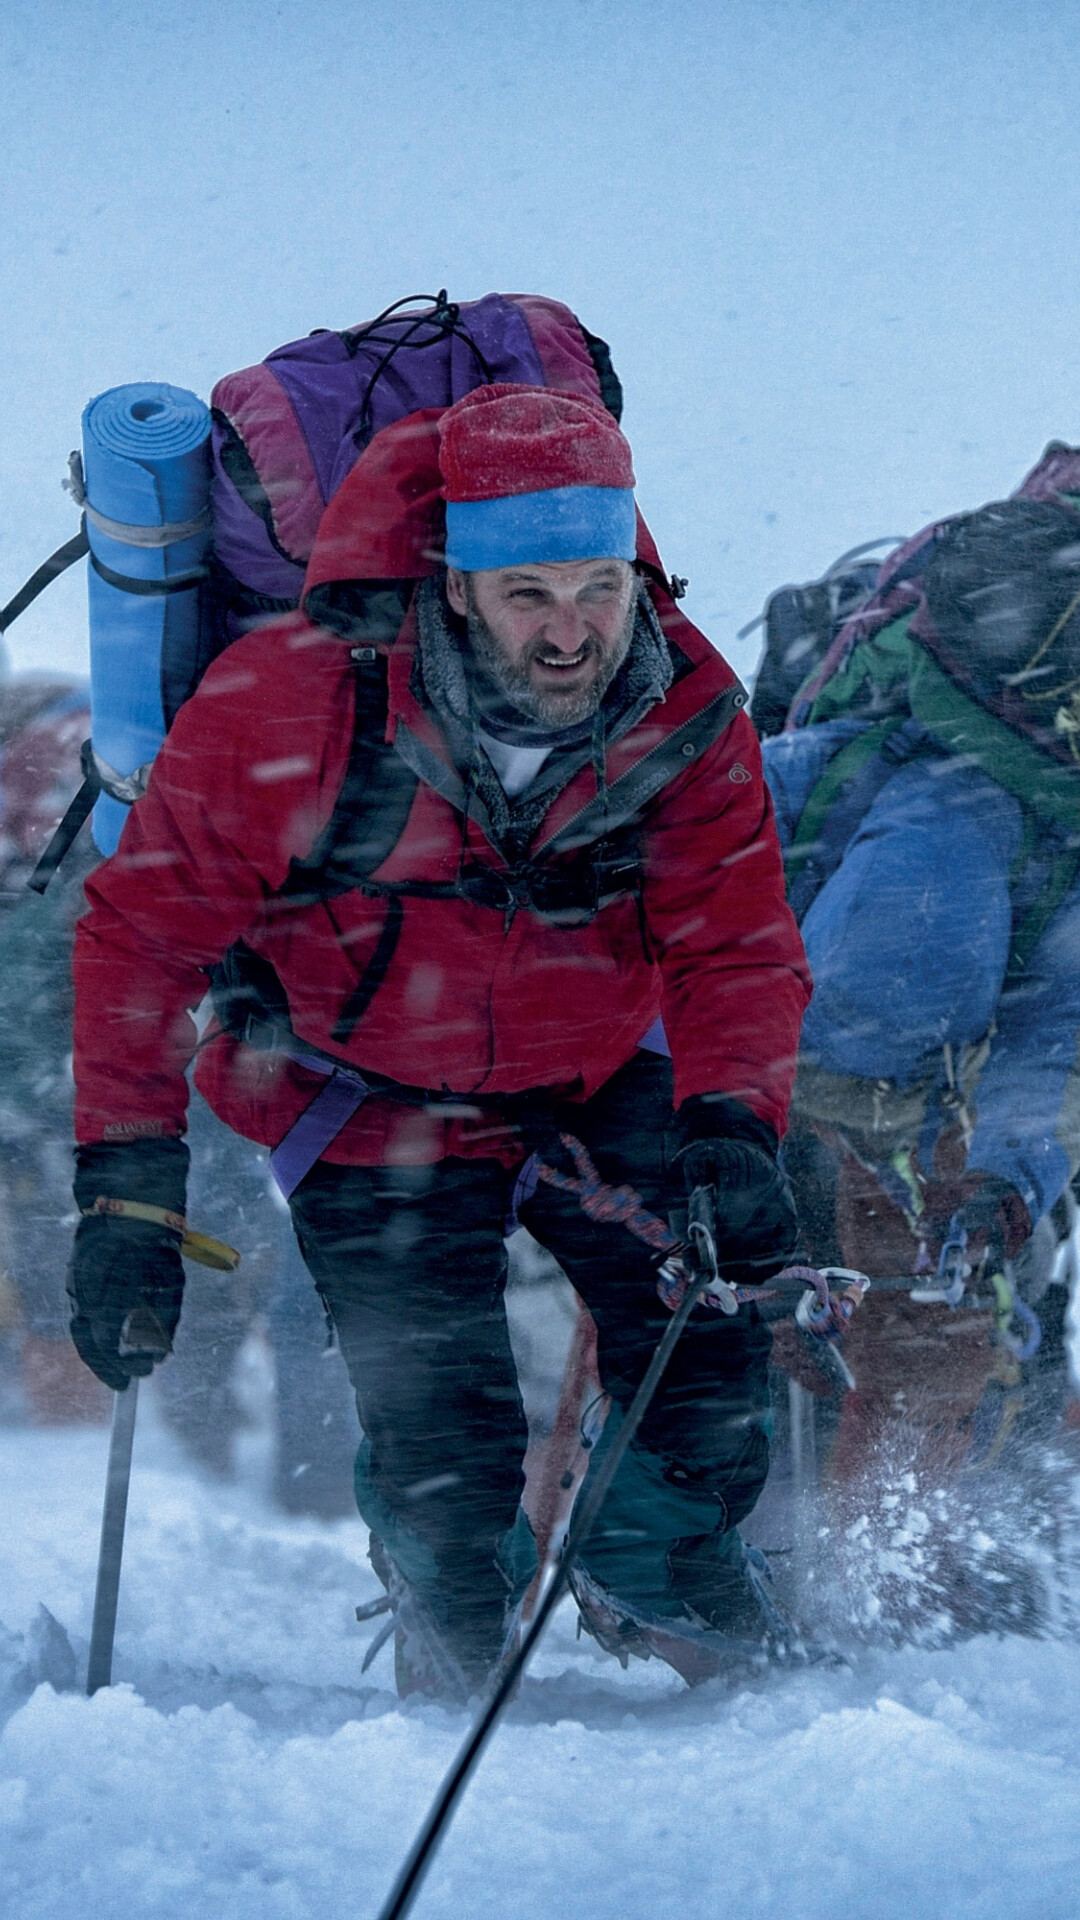 Everest (Movie 2015): Rob Hall, An experienced climber and the head of a company called Adventure Consulting. 1080x1920 Full HD Wallpaper.